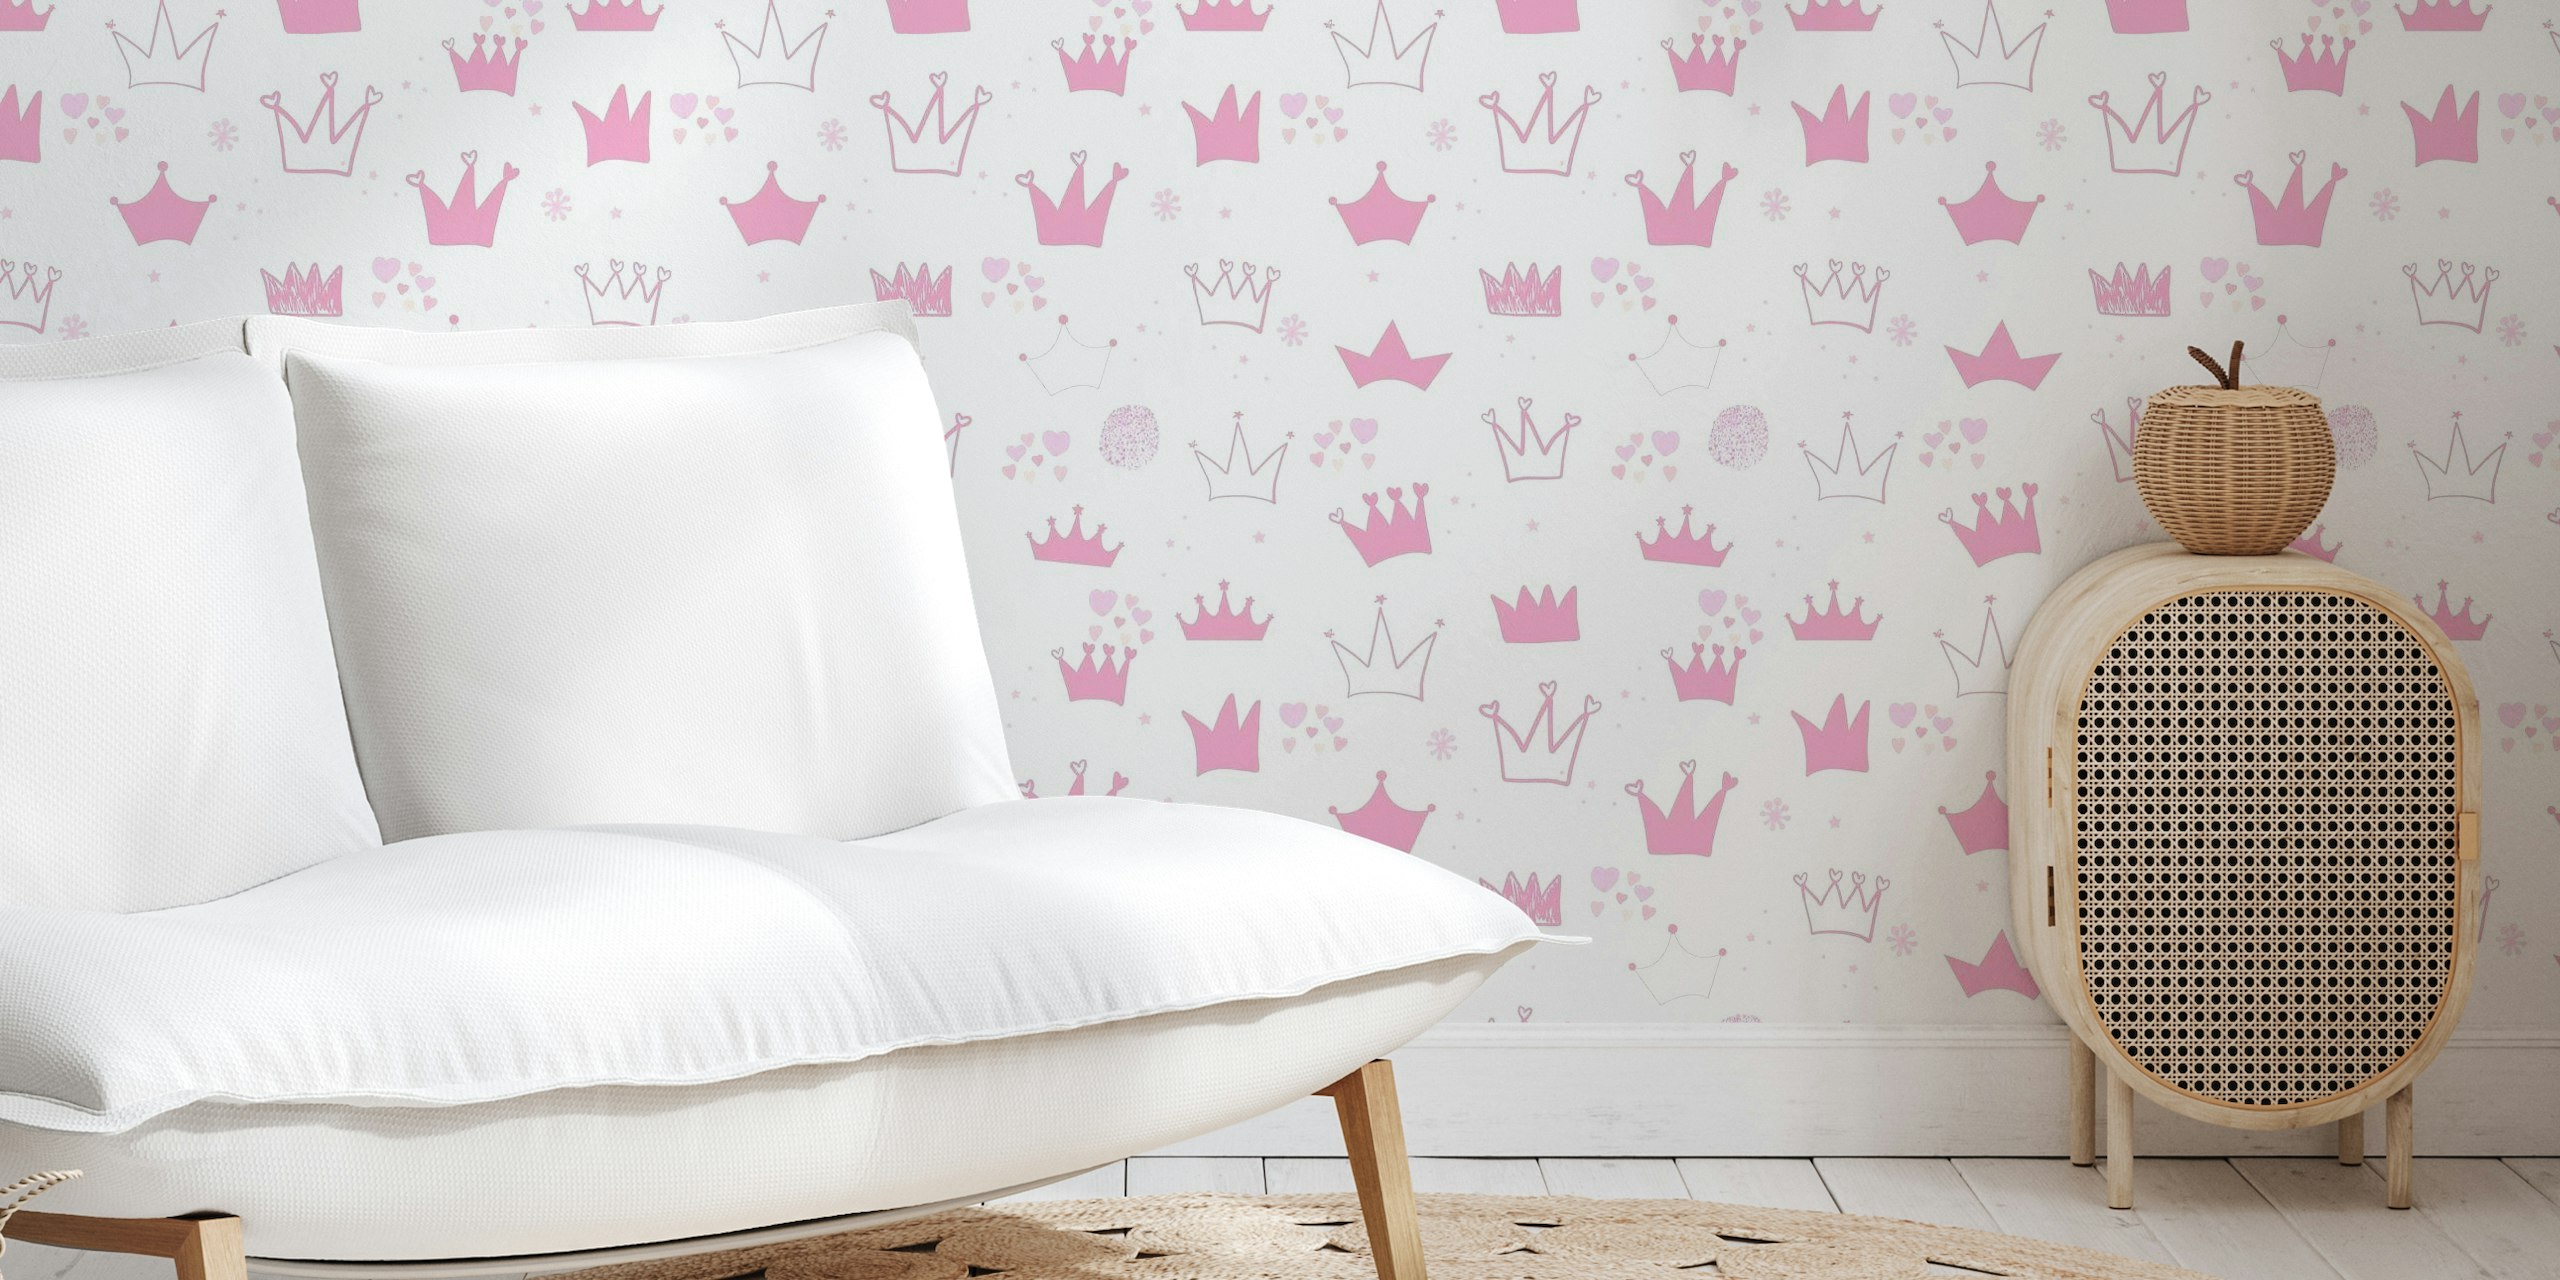 Hand-drawn crowns and hearts pattern wall mural in pink hues for a baby girl's room